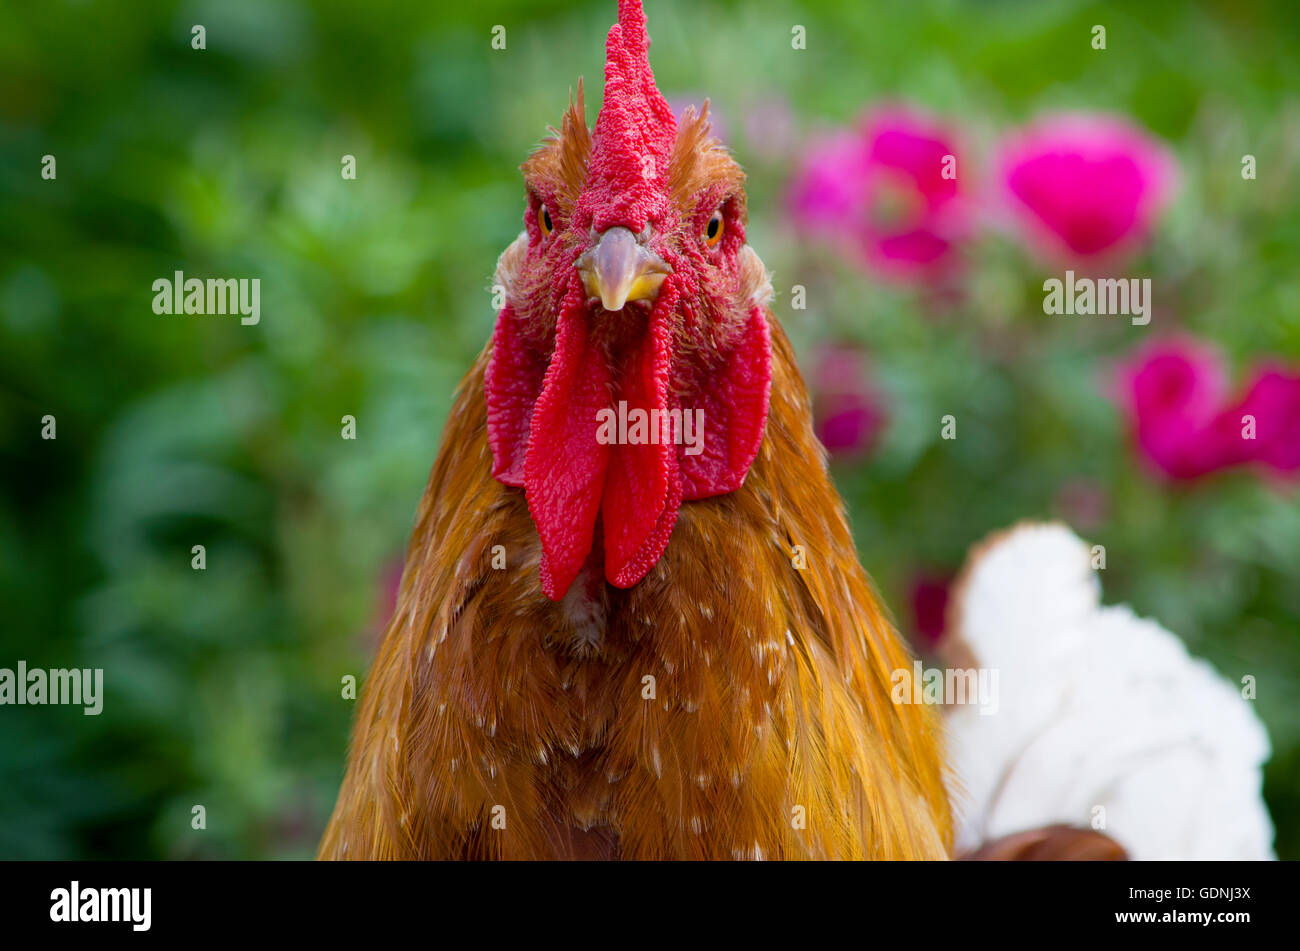 Poultry head of a rooster thoroughbred,bird, breed, economy, farmer, farming, house, portrait, poultry farming, rooster Stock Photo